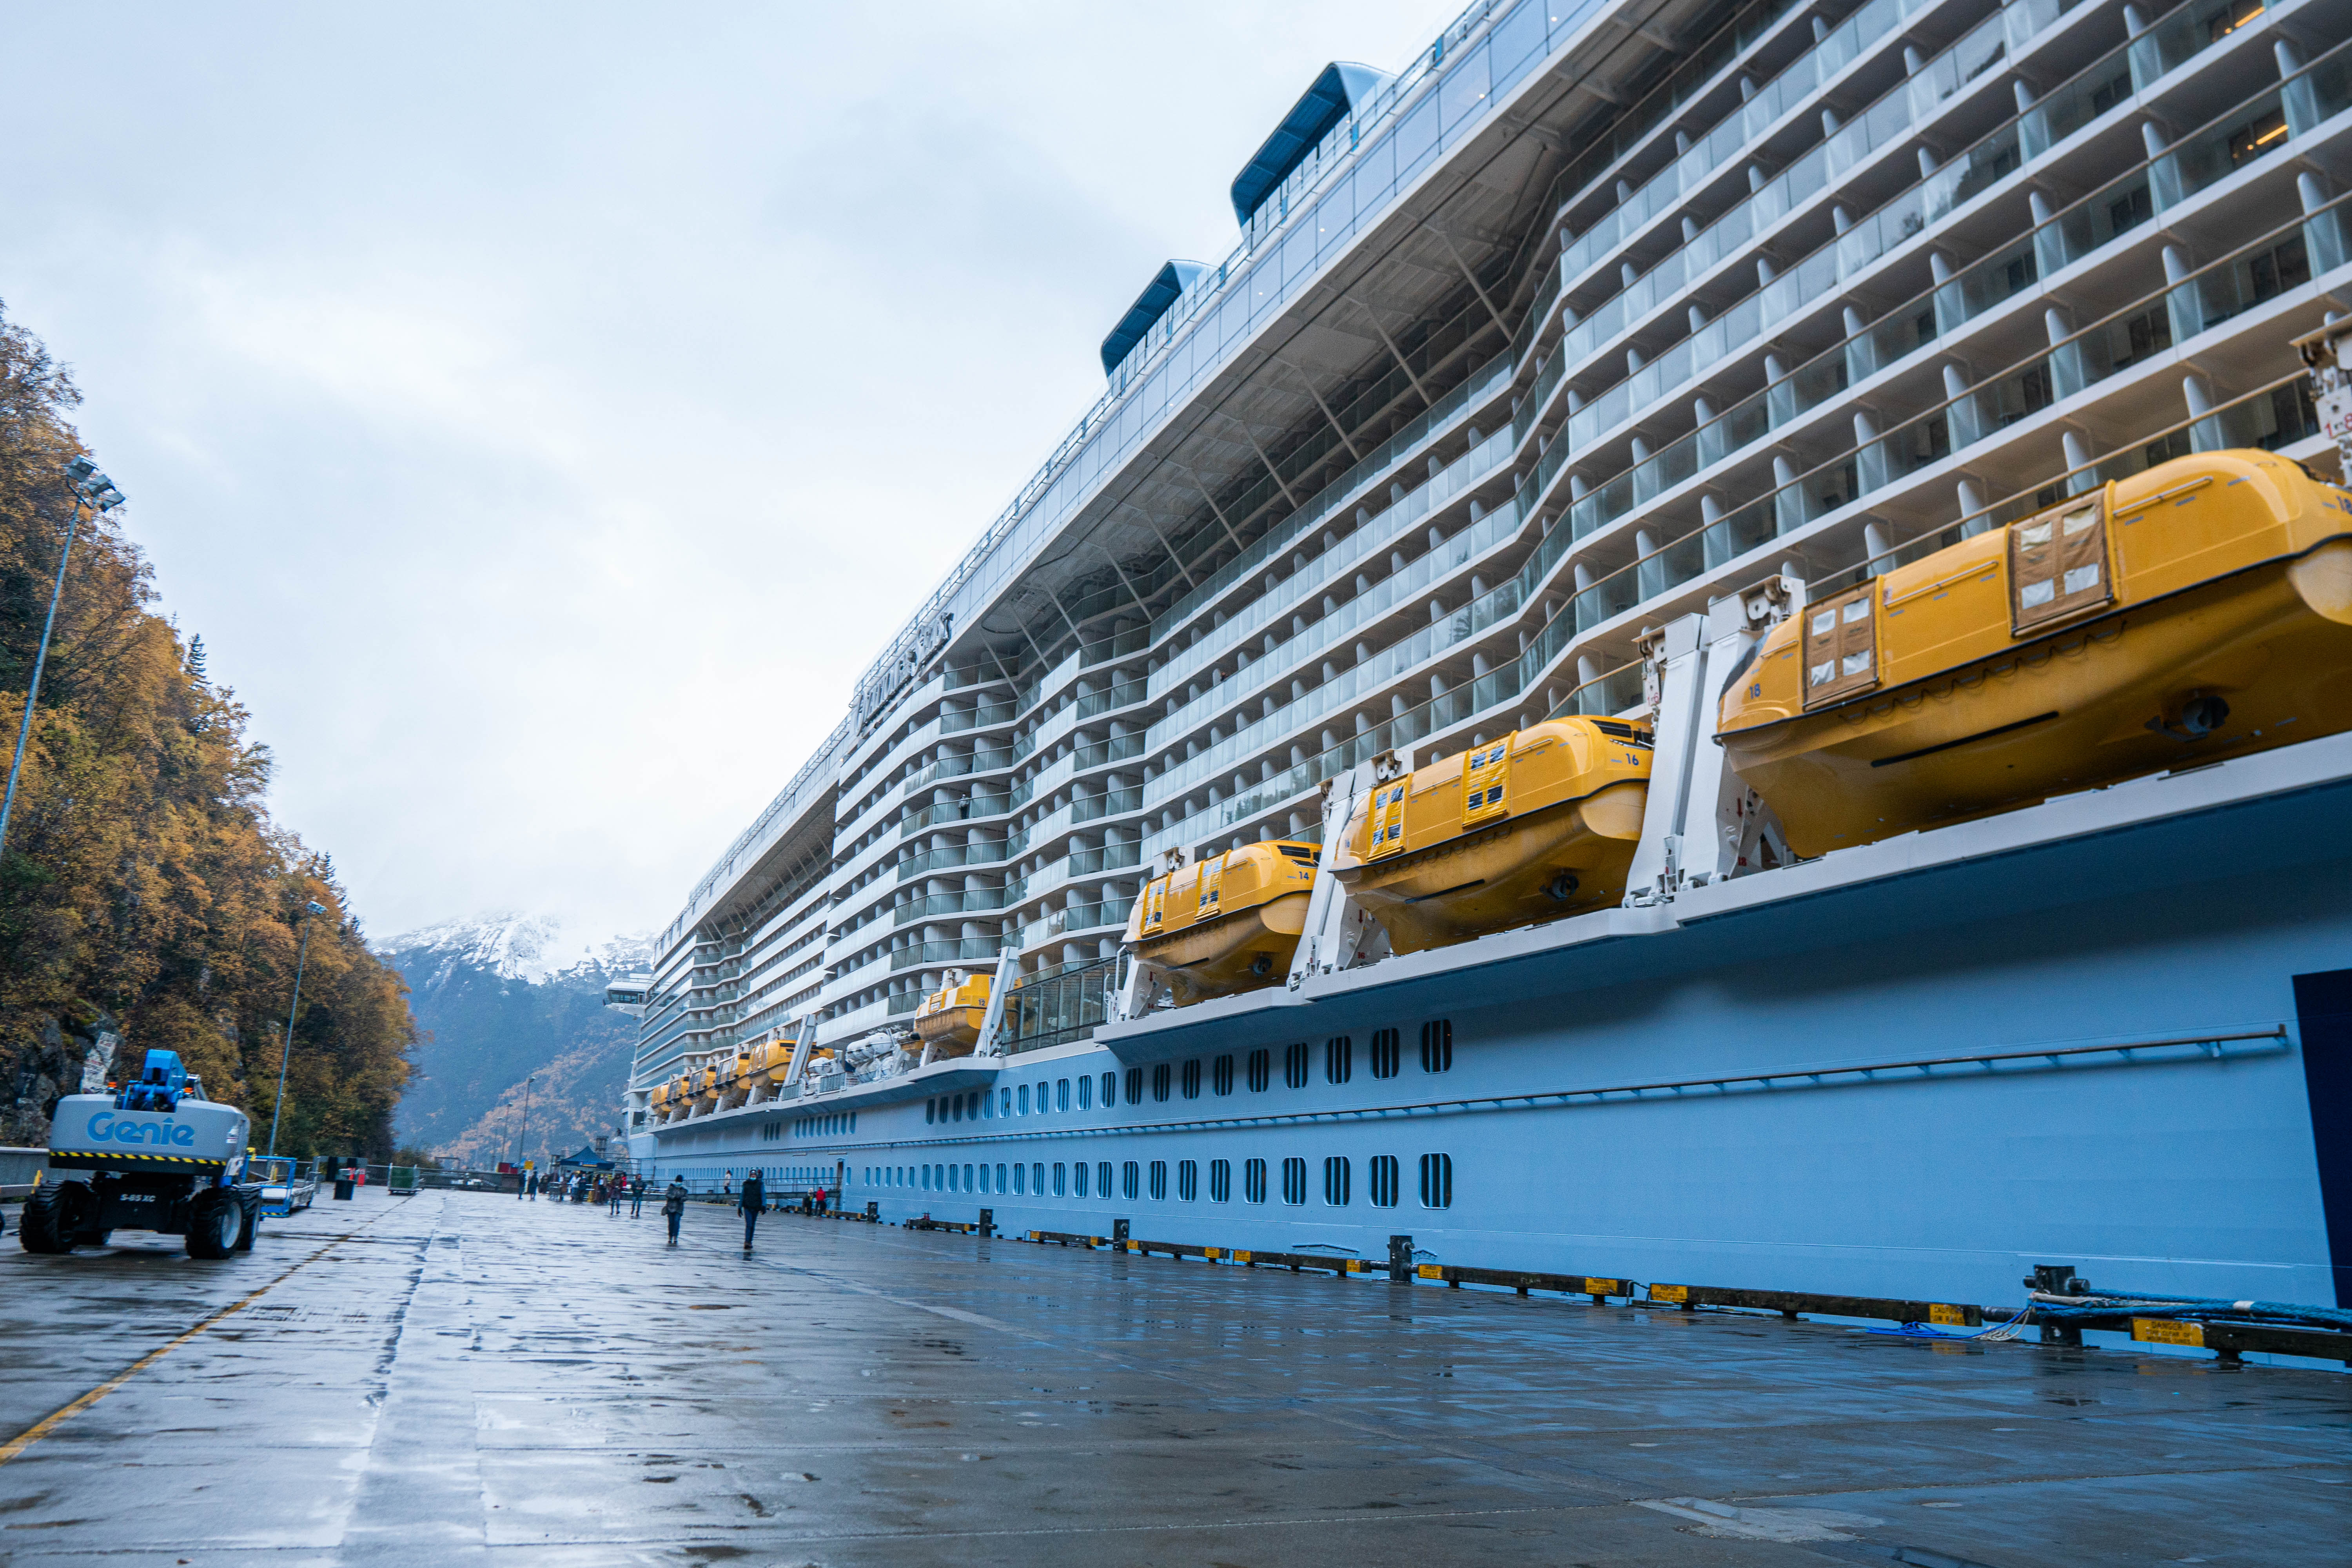 Episode 515 - Ovation of the Seas cruise review